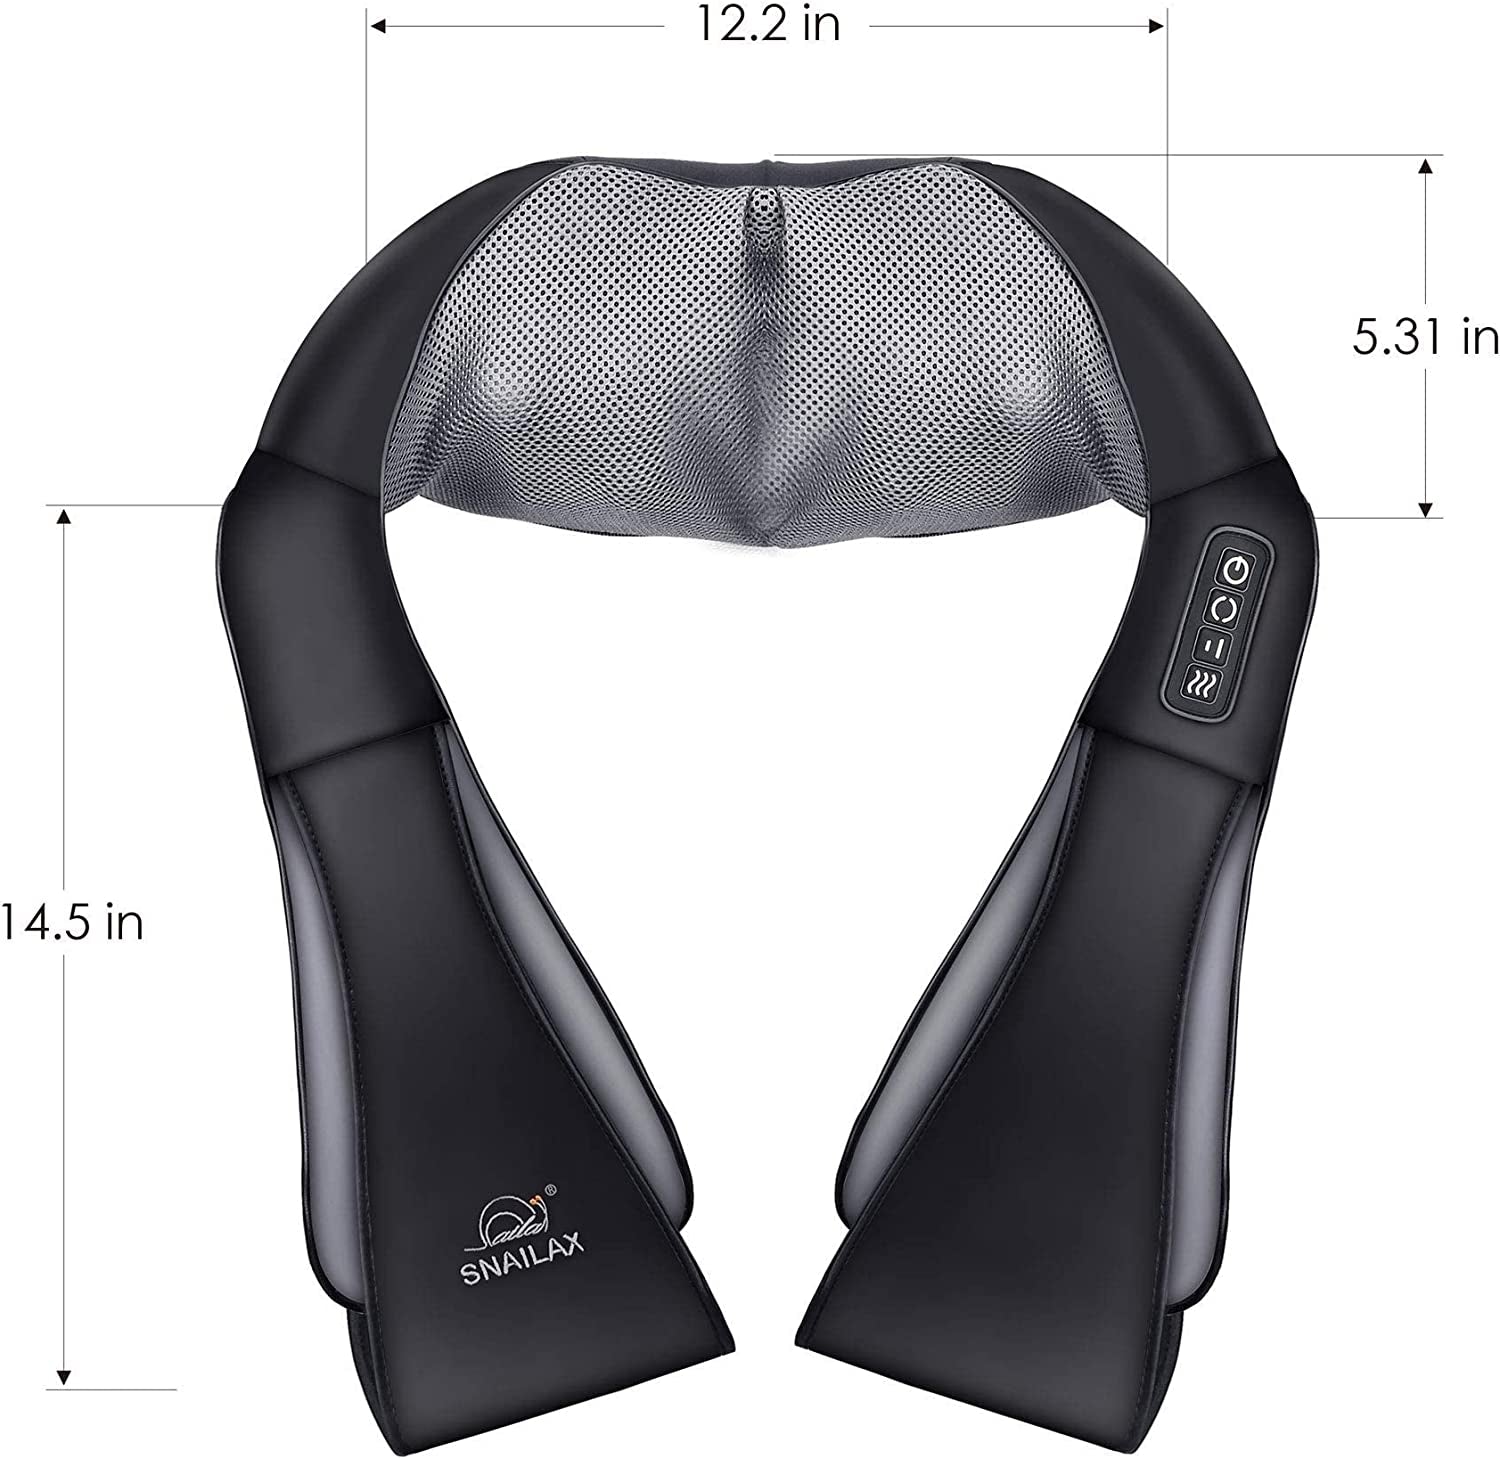 Neck Massager With Heat